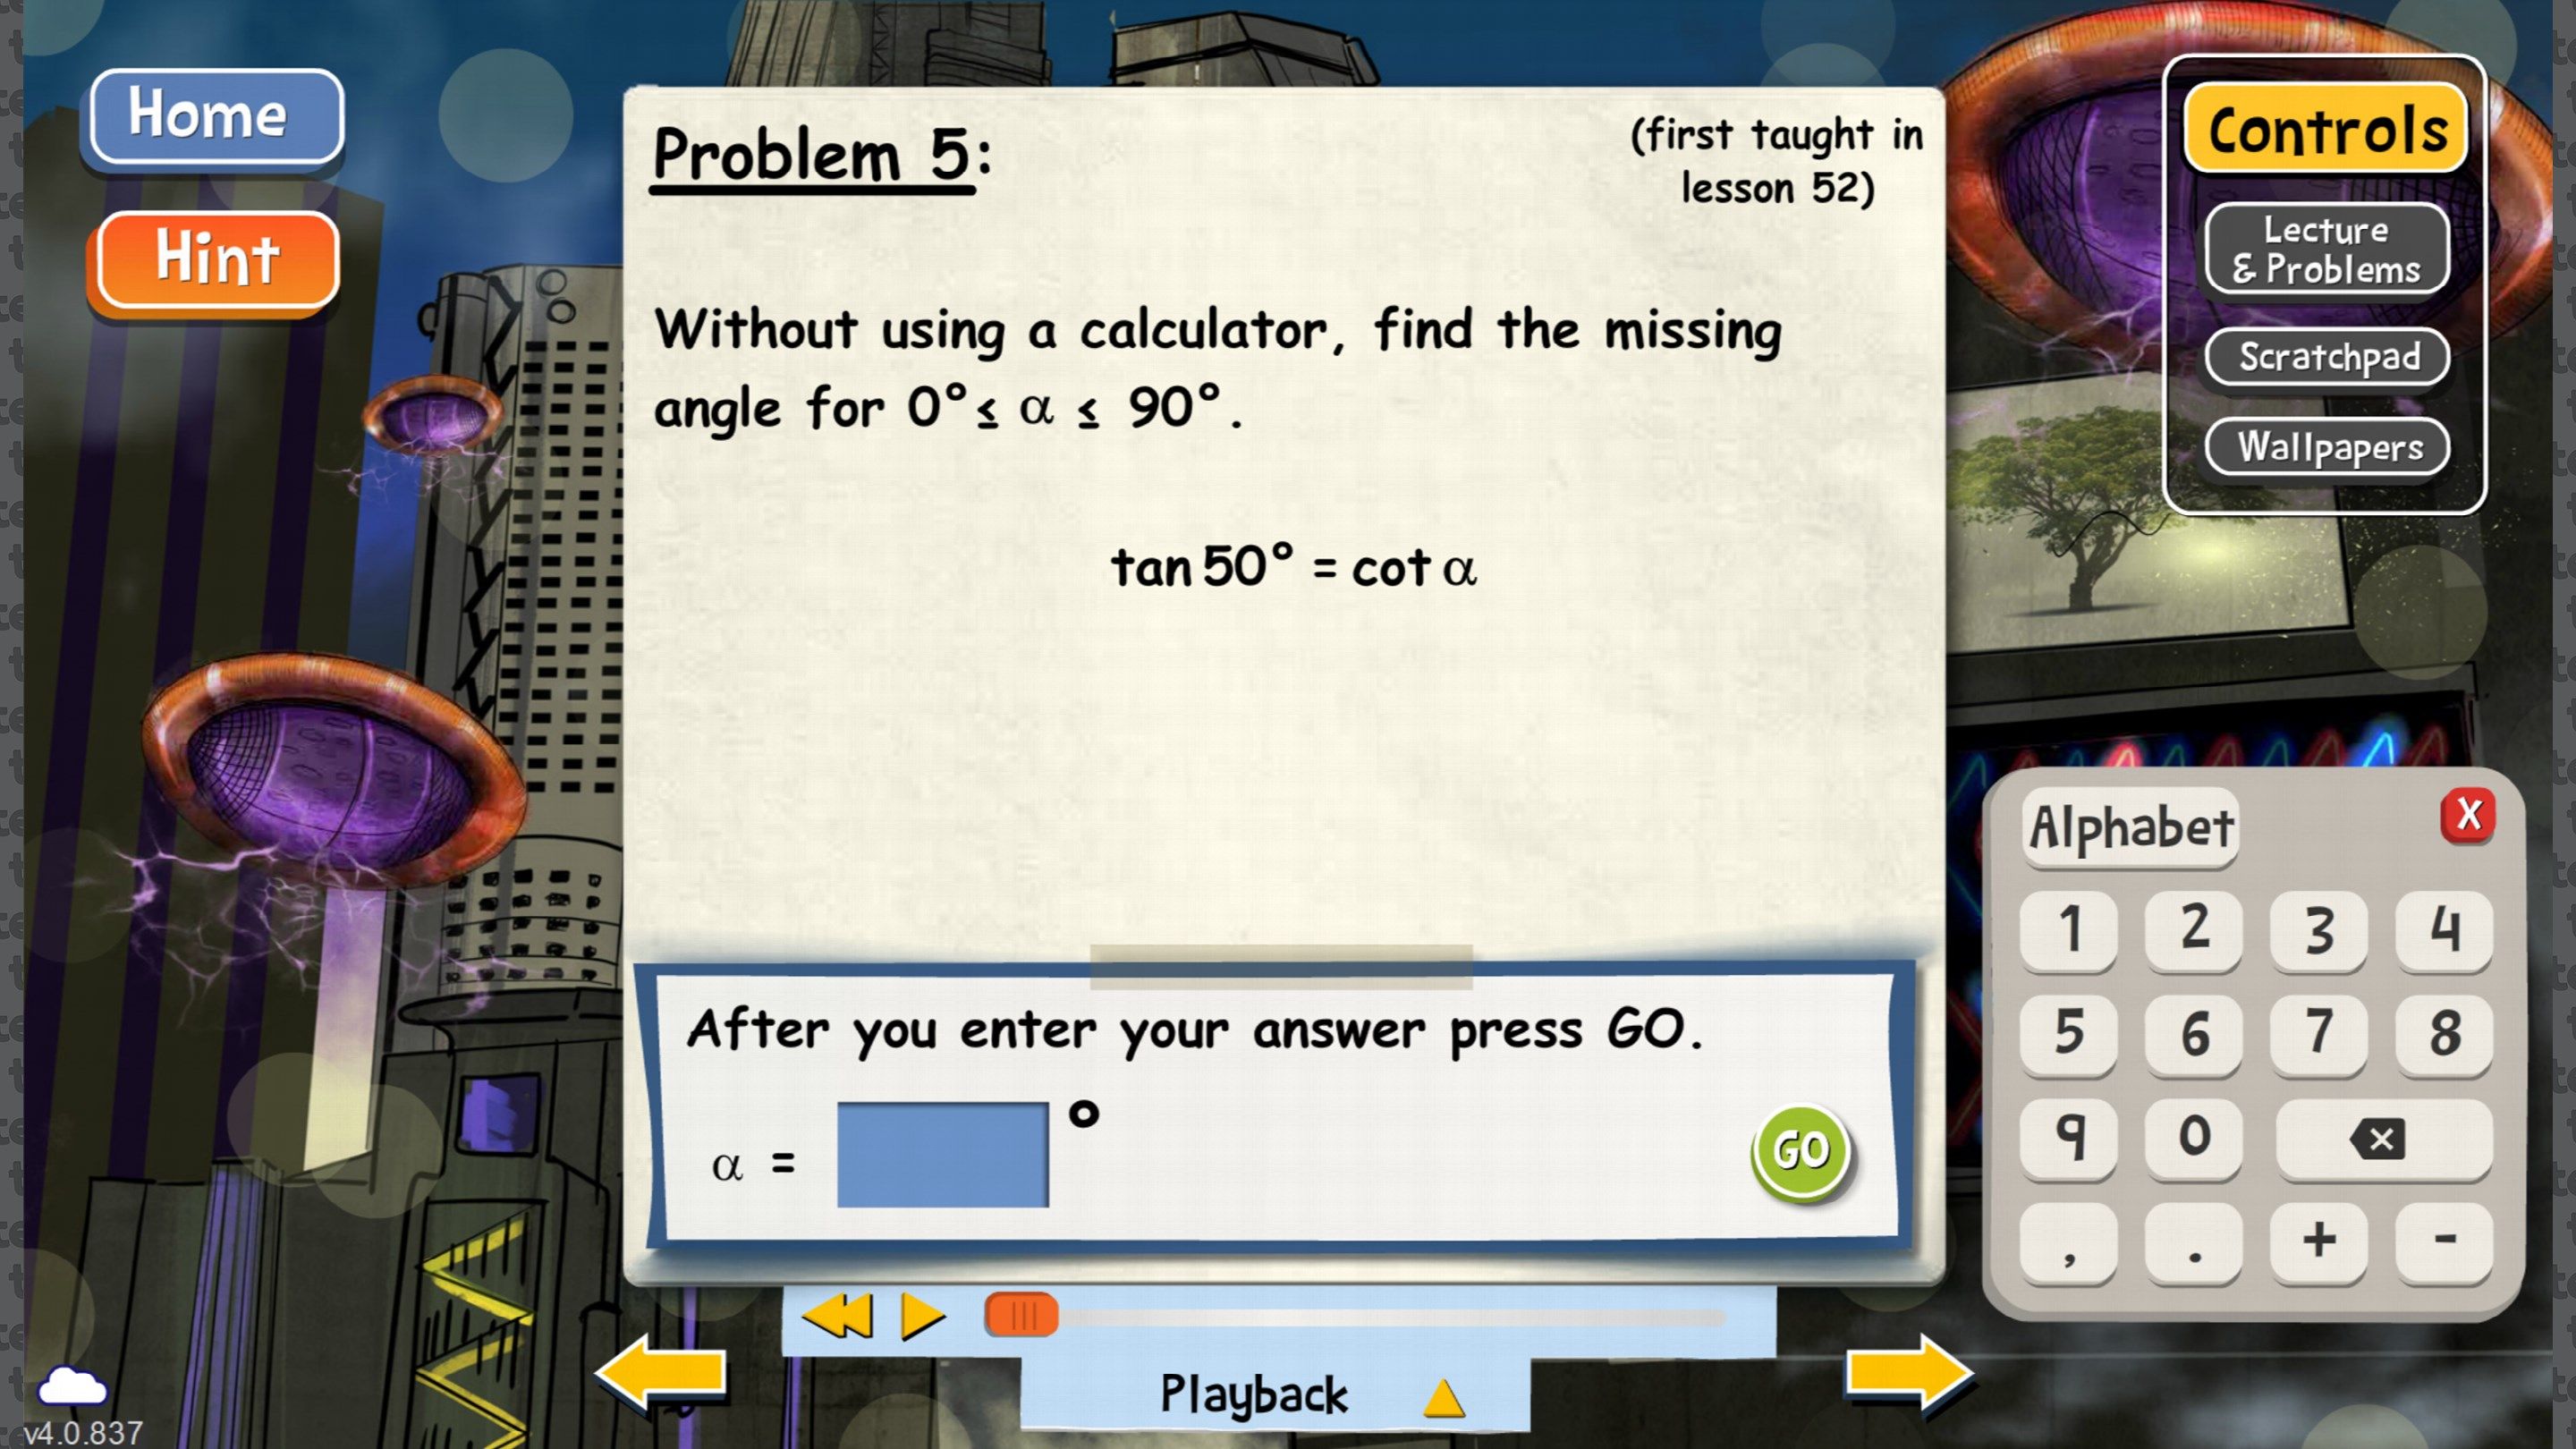 Every problem is displayed on the screen, and spoken by a human narrator. Students can use the device’s keyboard or our built-in keypad to enter the answer.